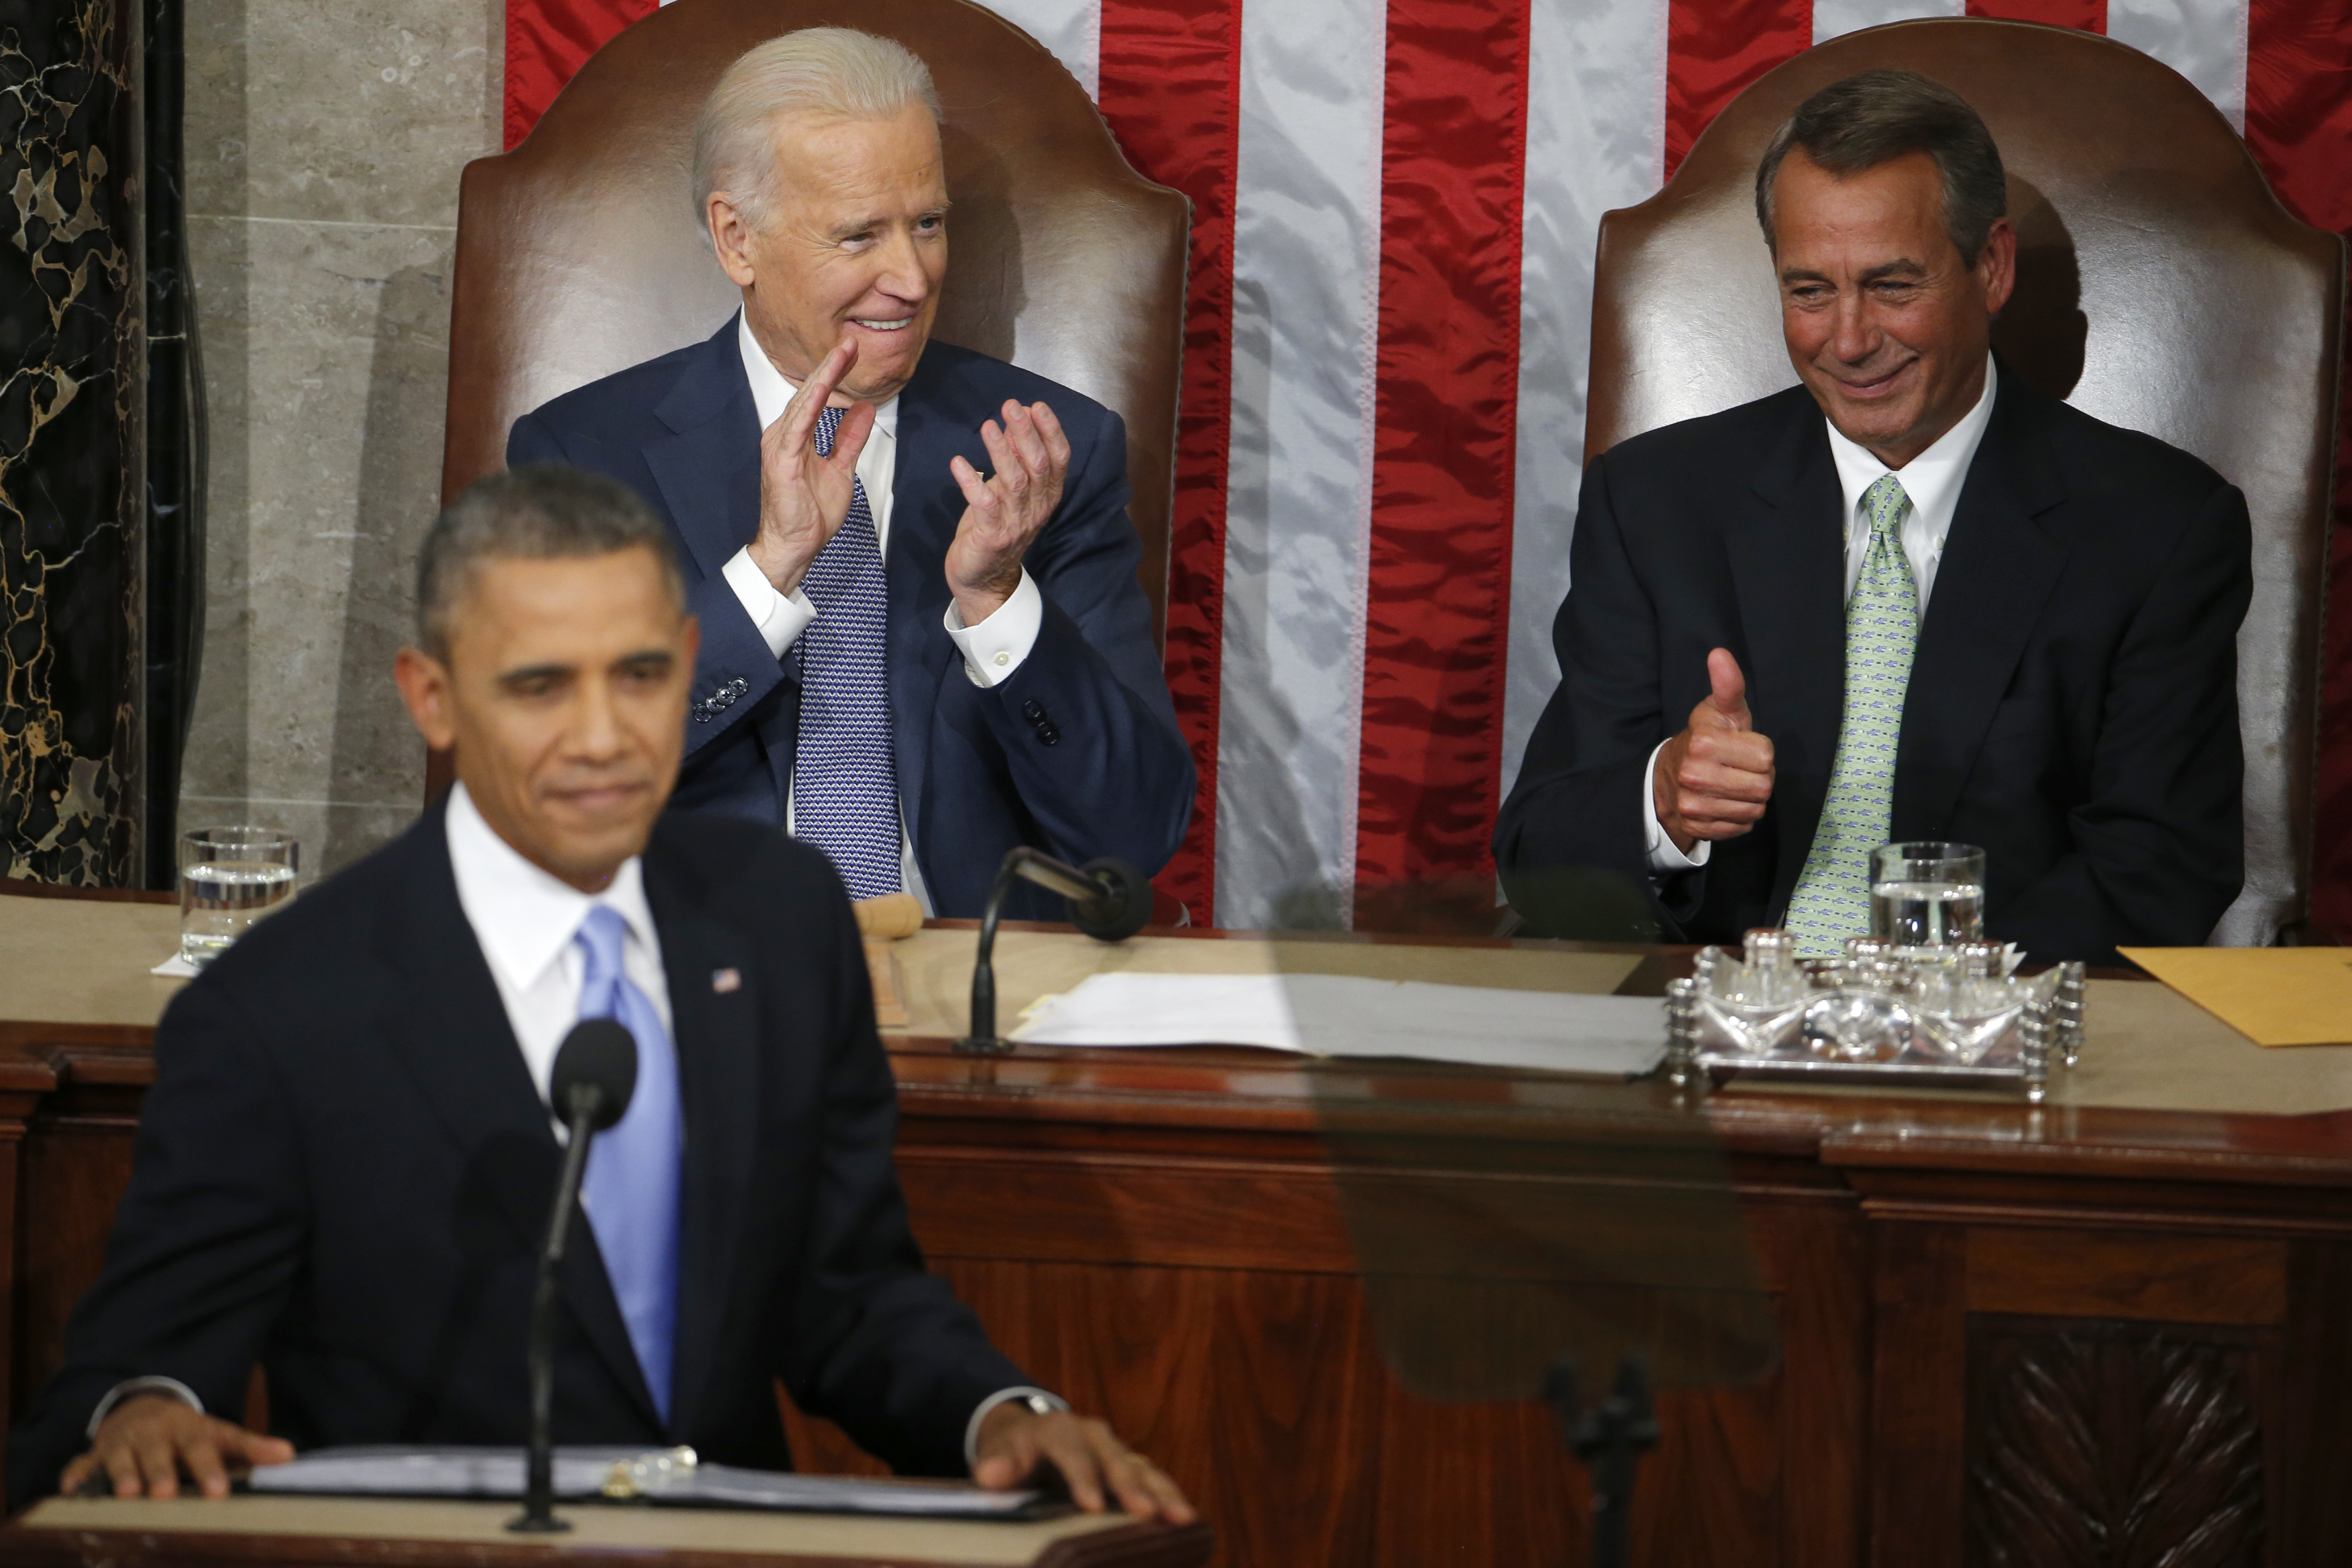 Boehner gestures toward President Obama as Joe Biden applauds during the president's State of the Union address on Capitol Hill in Washington on Jan. 28, 2014.